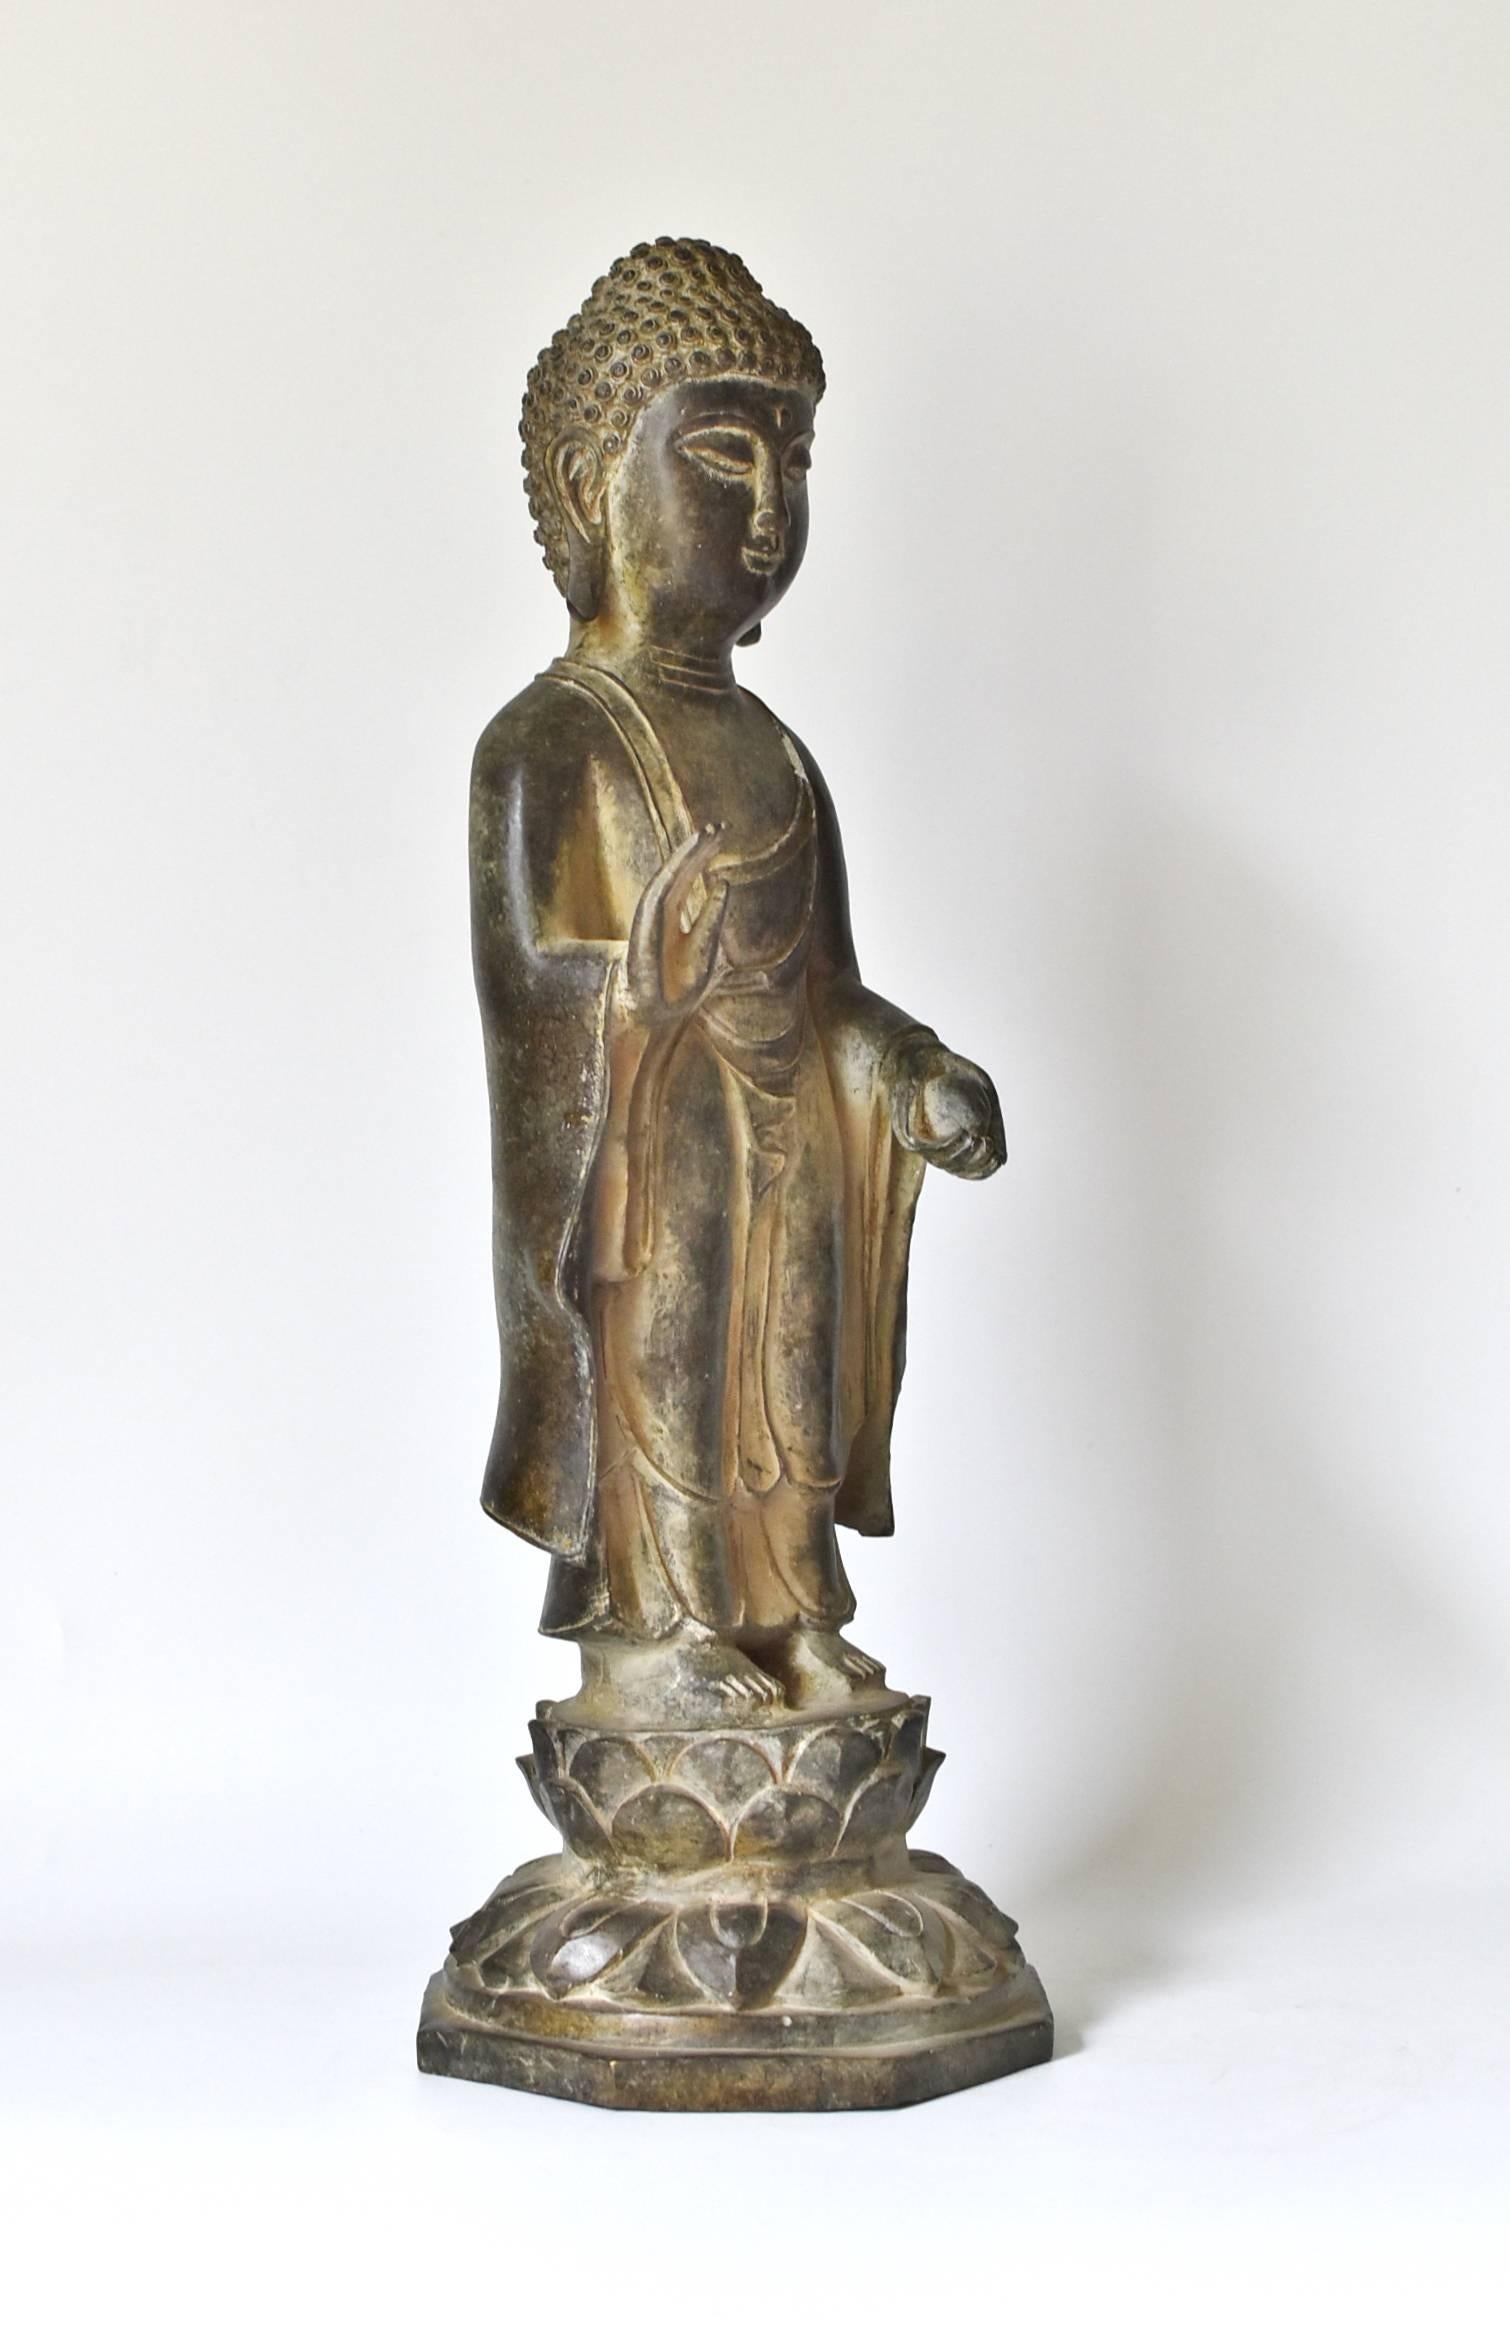 A beautiful bronze standing Buddha statue on a lotus stand. The style of the piece is of the Tang dynasty era, with a full face, long ear lobes and scrolled hair style. Beautiful, finely defined facial features convey a sense of calm and serenity.